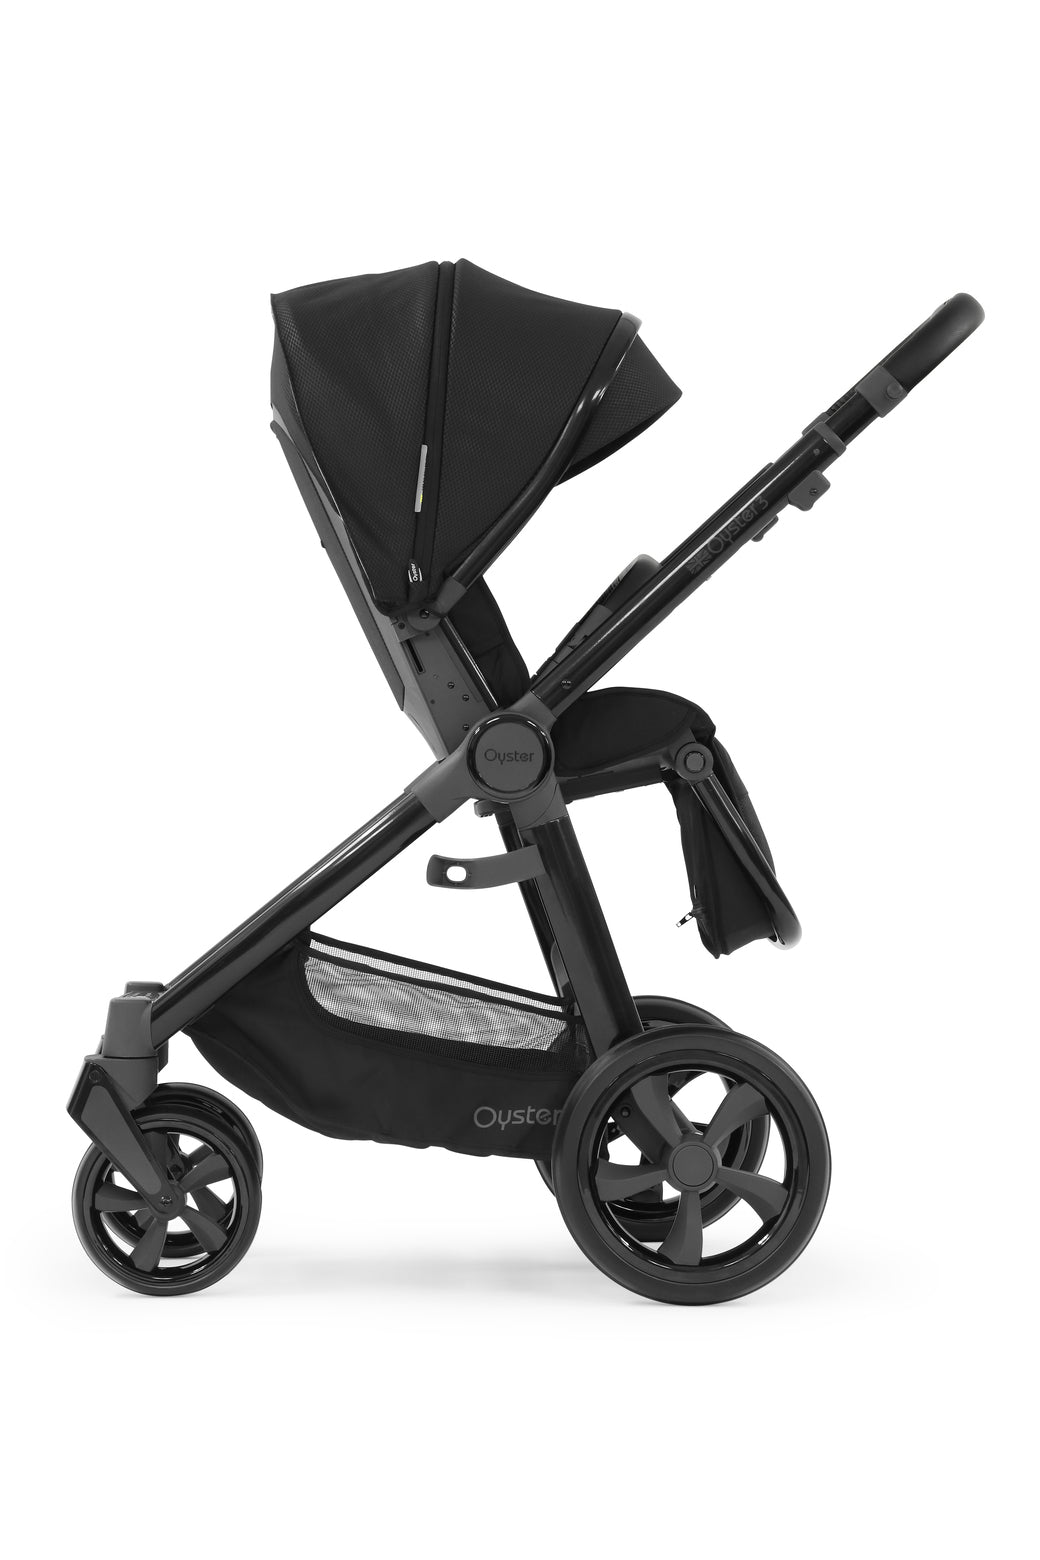 Babystyle Oyster 3 Essential 5 Piece Travel System Bundle With Carbriofix - Pixel - For Your Little One